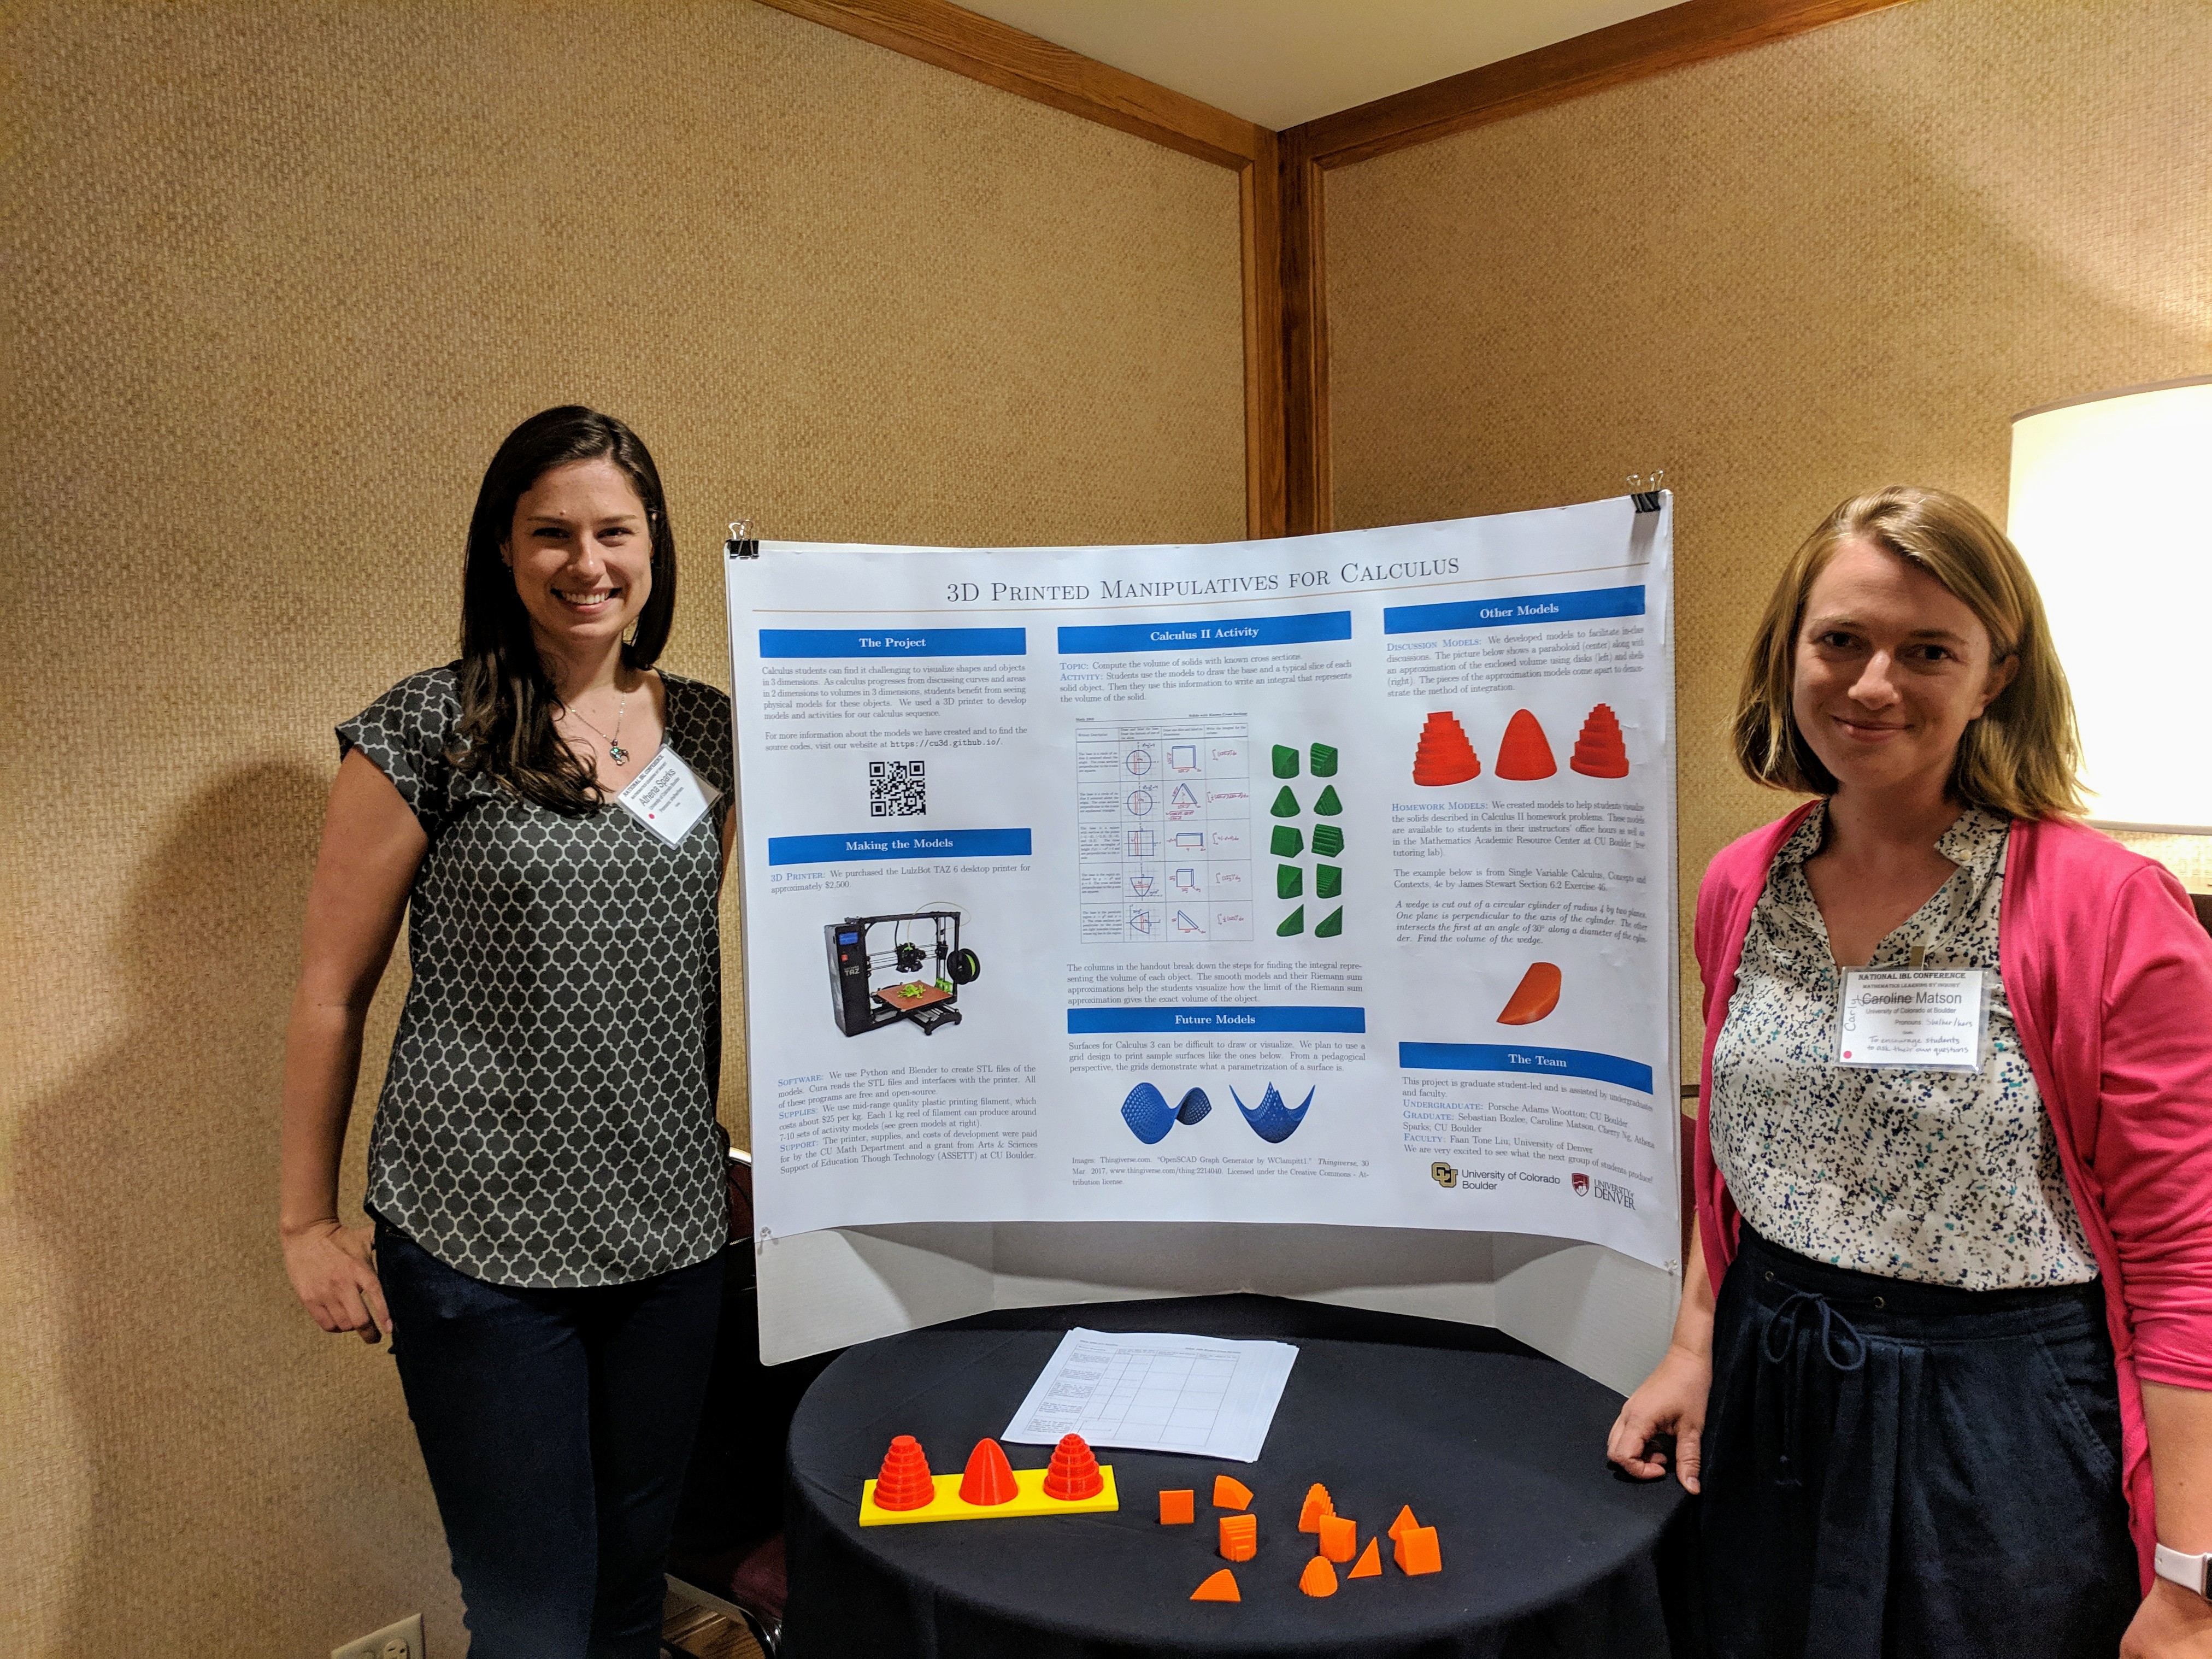 Carly and Athena presenting a poster on our work